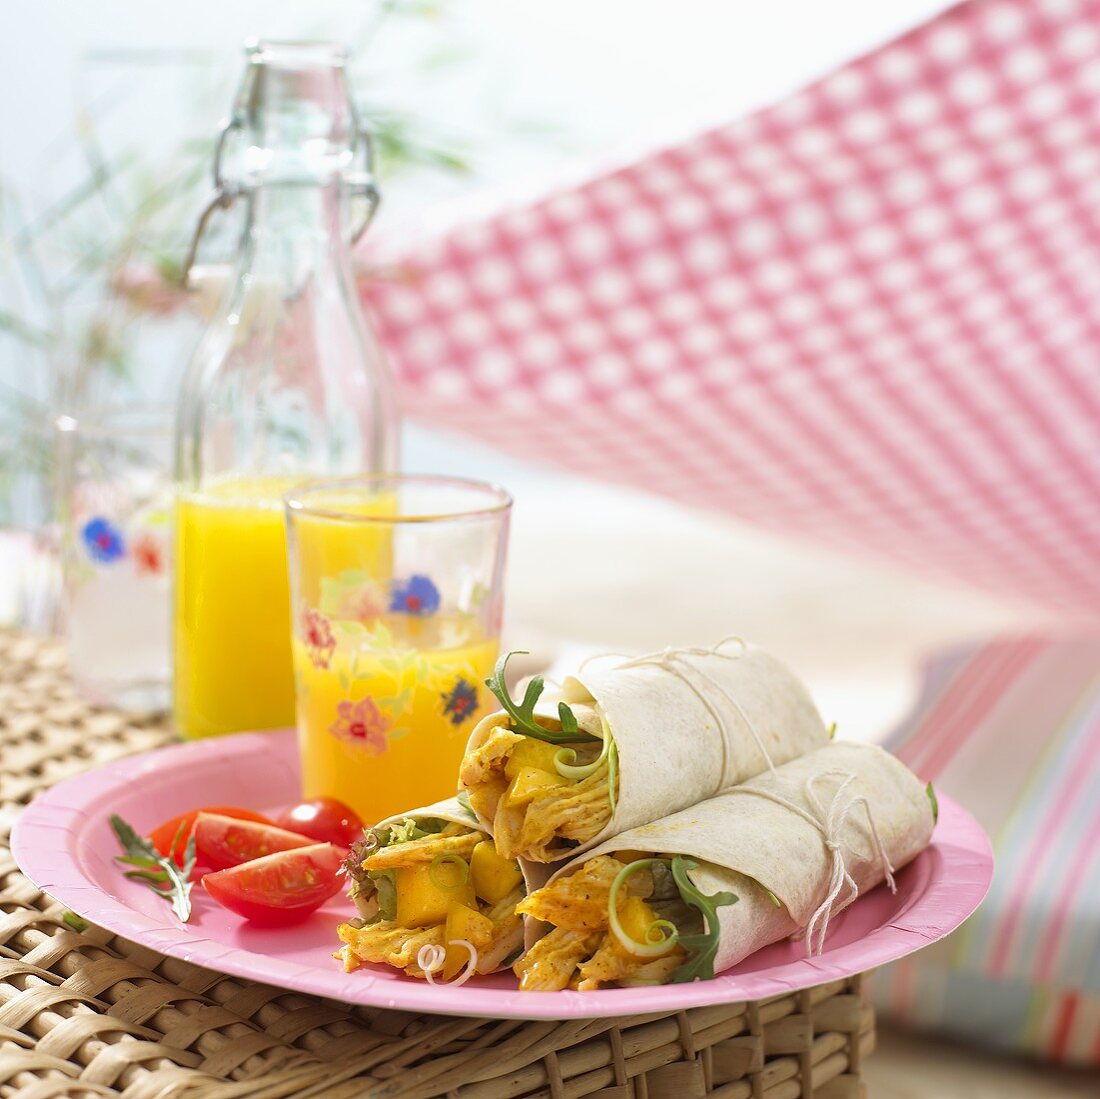 Chicken and mango wraps for a picnic